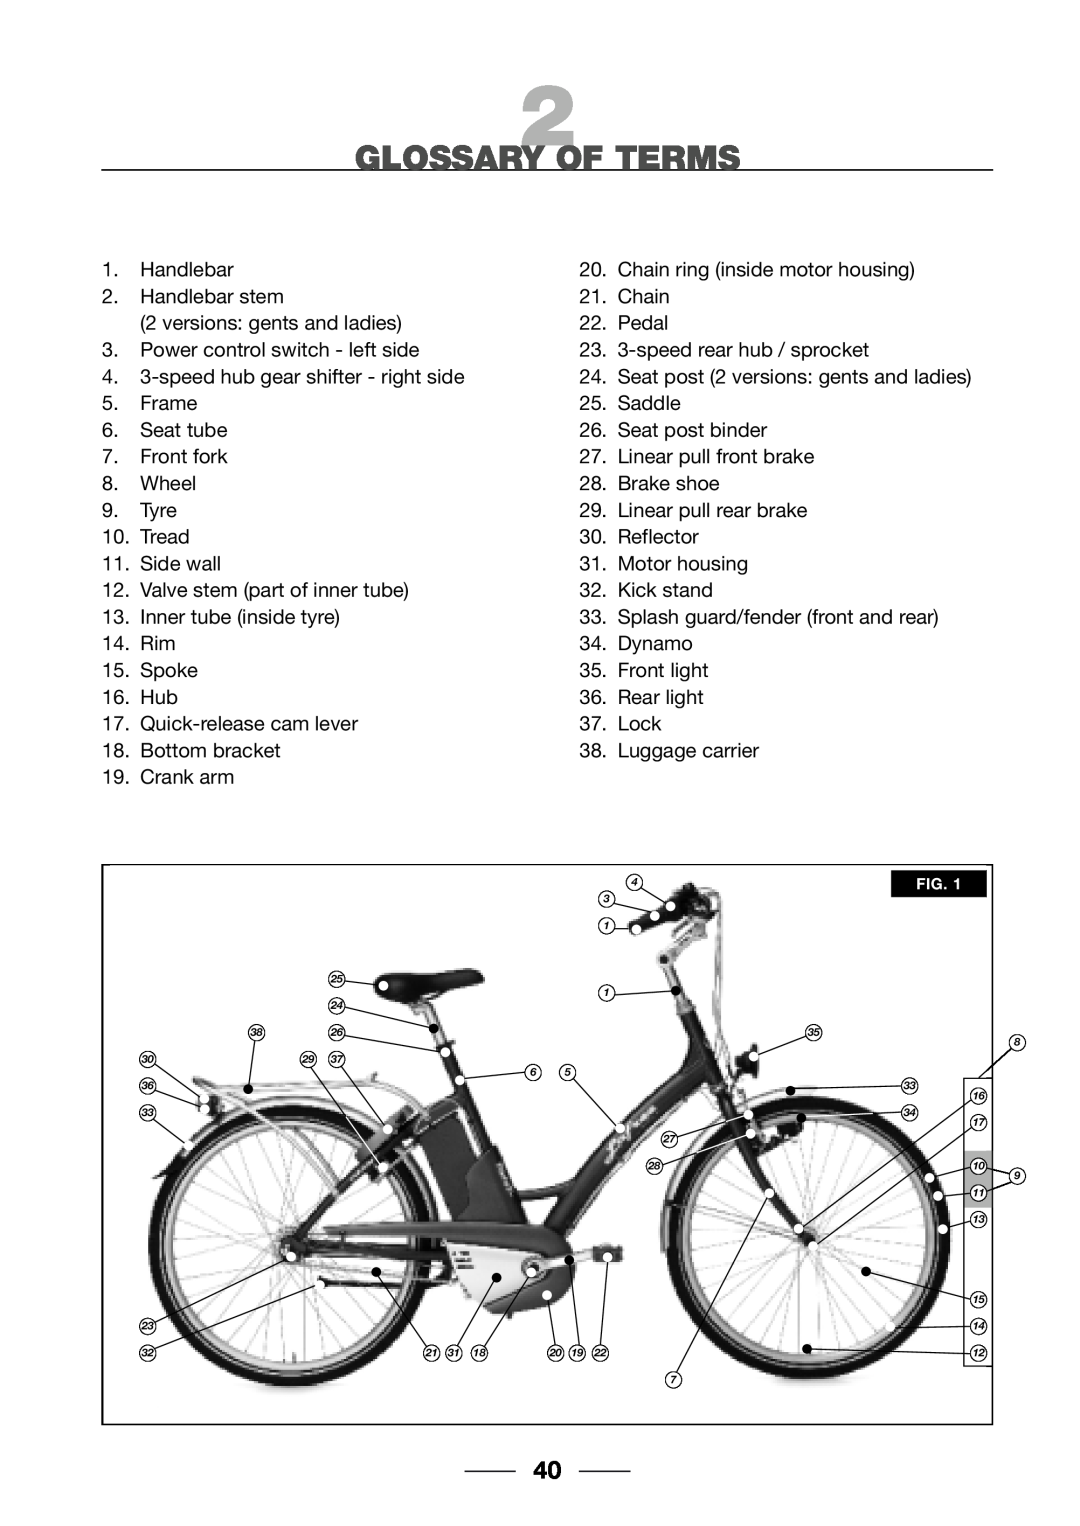 Giant 2002 Motorized Bicycle owner manual Glossary Of Terms, Seat post 2 versions gents and ladies 